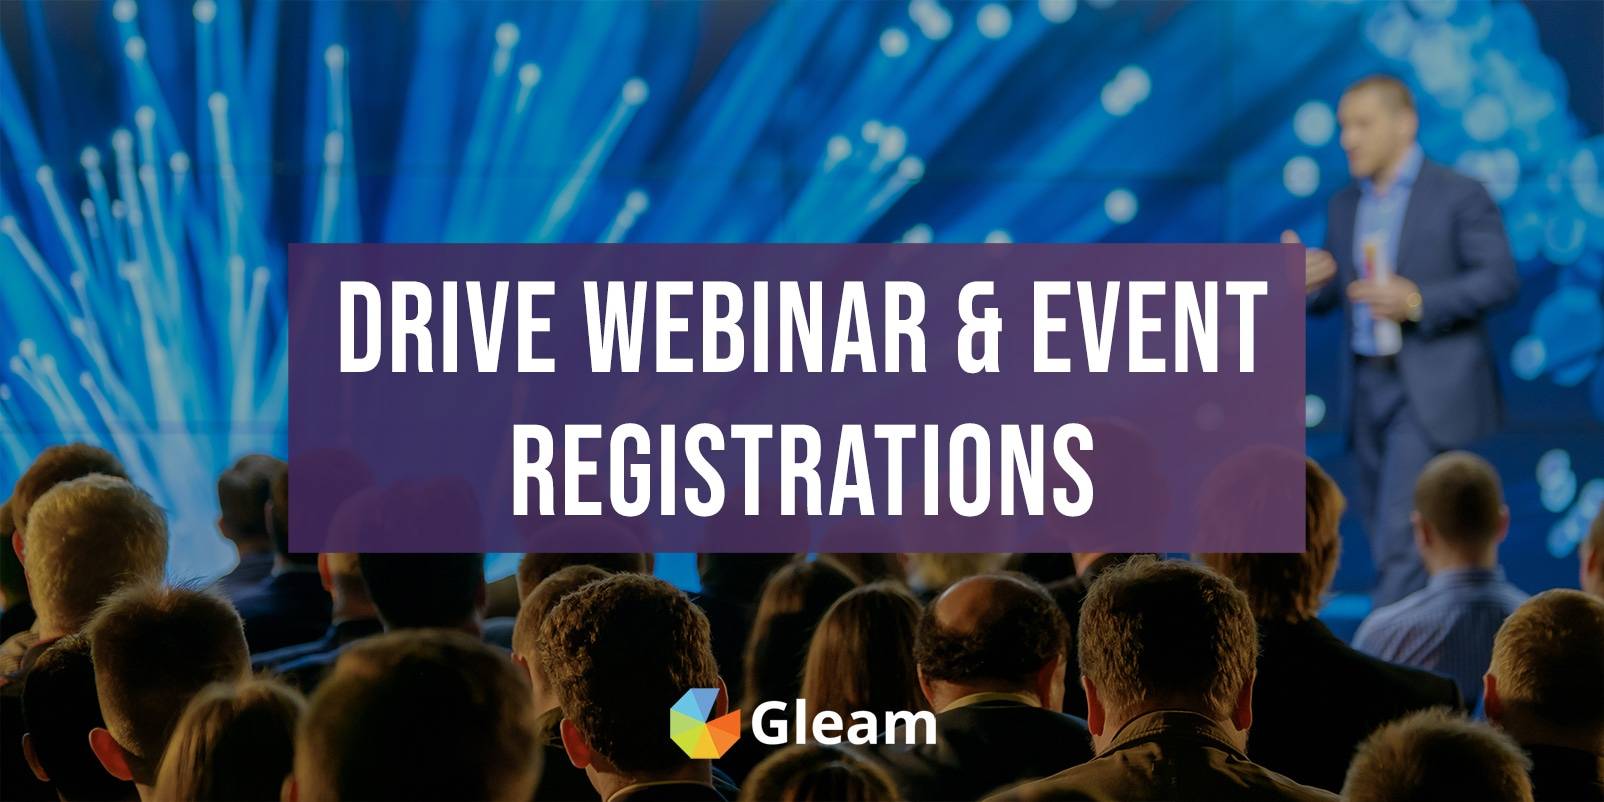 Drive Webinar & Event Registrations with Gleam